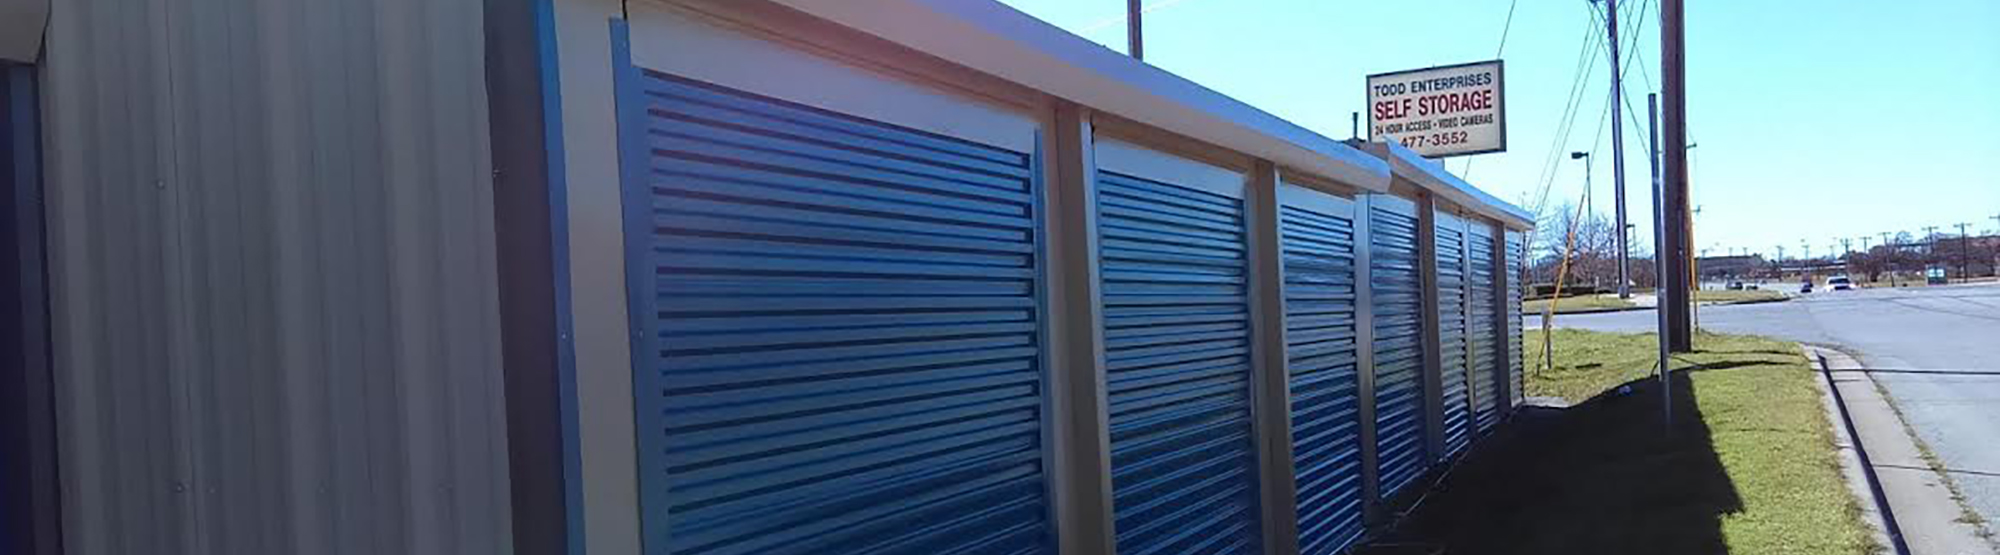 storage units with exterior access